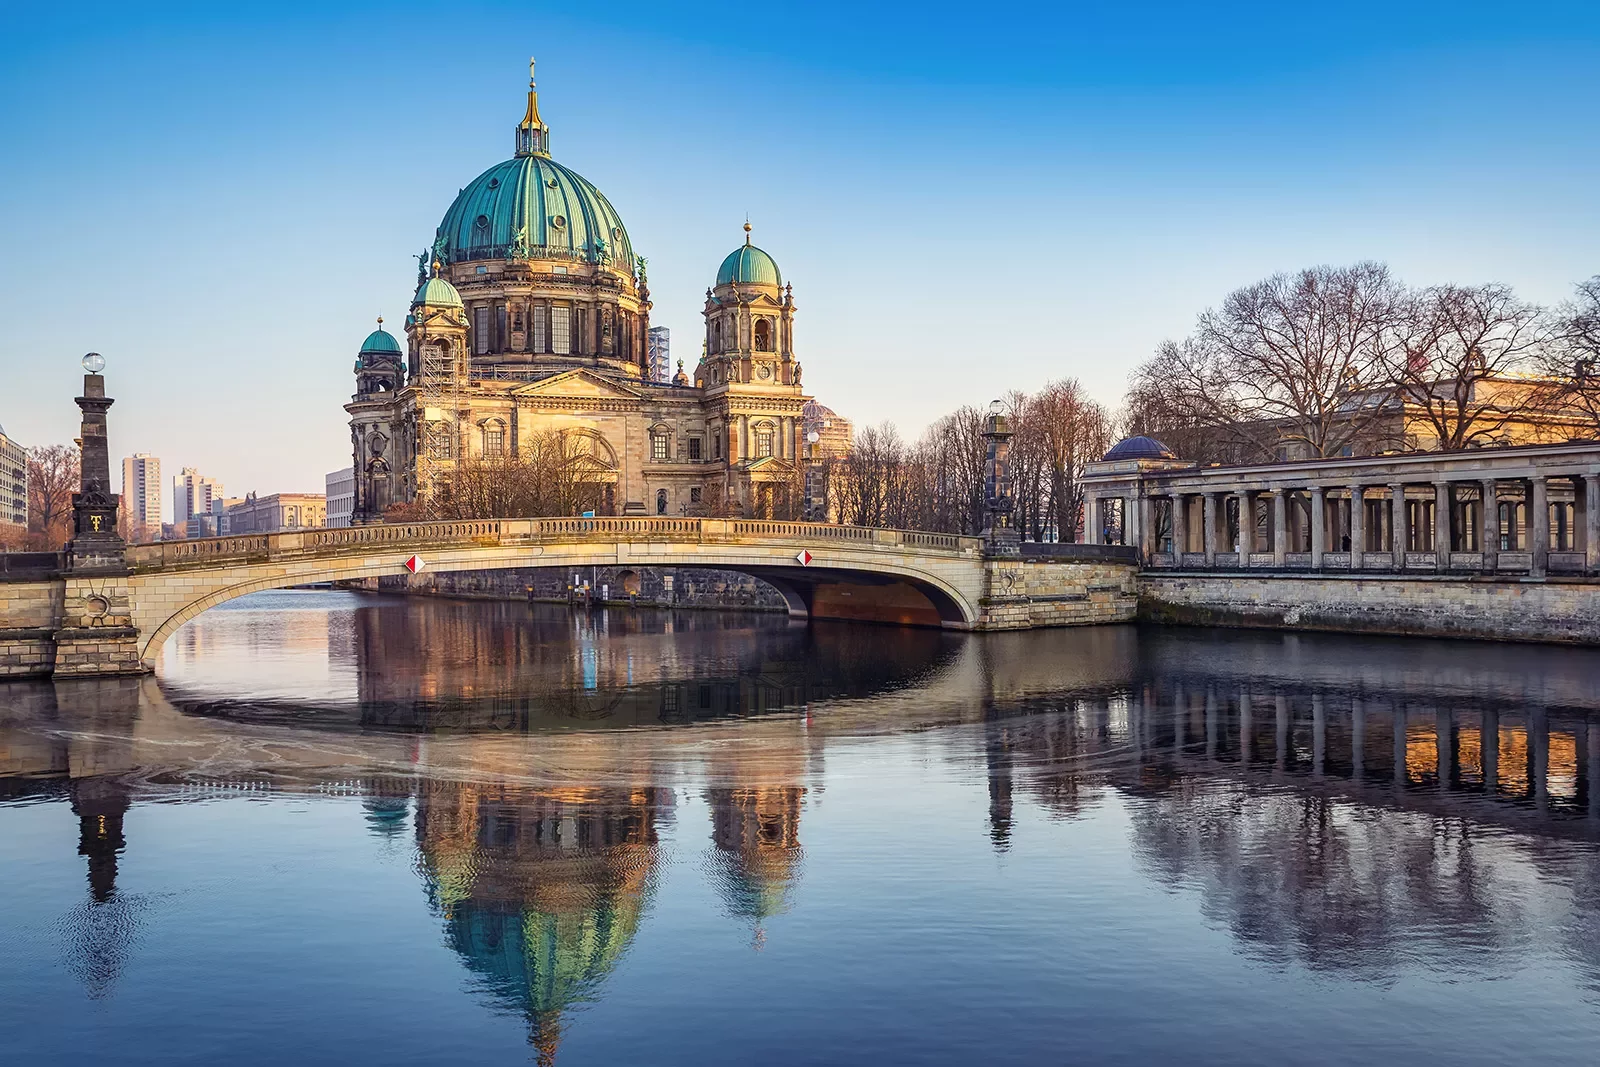 The Berlin Cathedral at sunset.